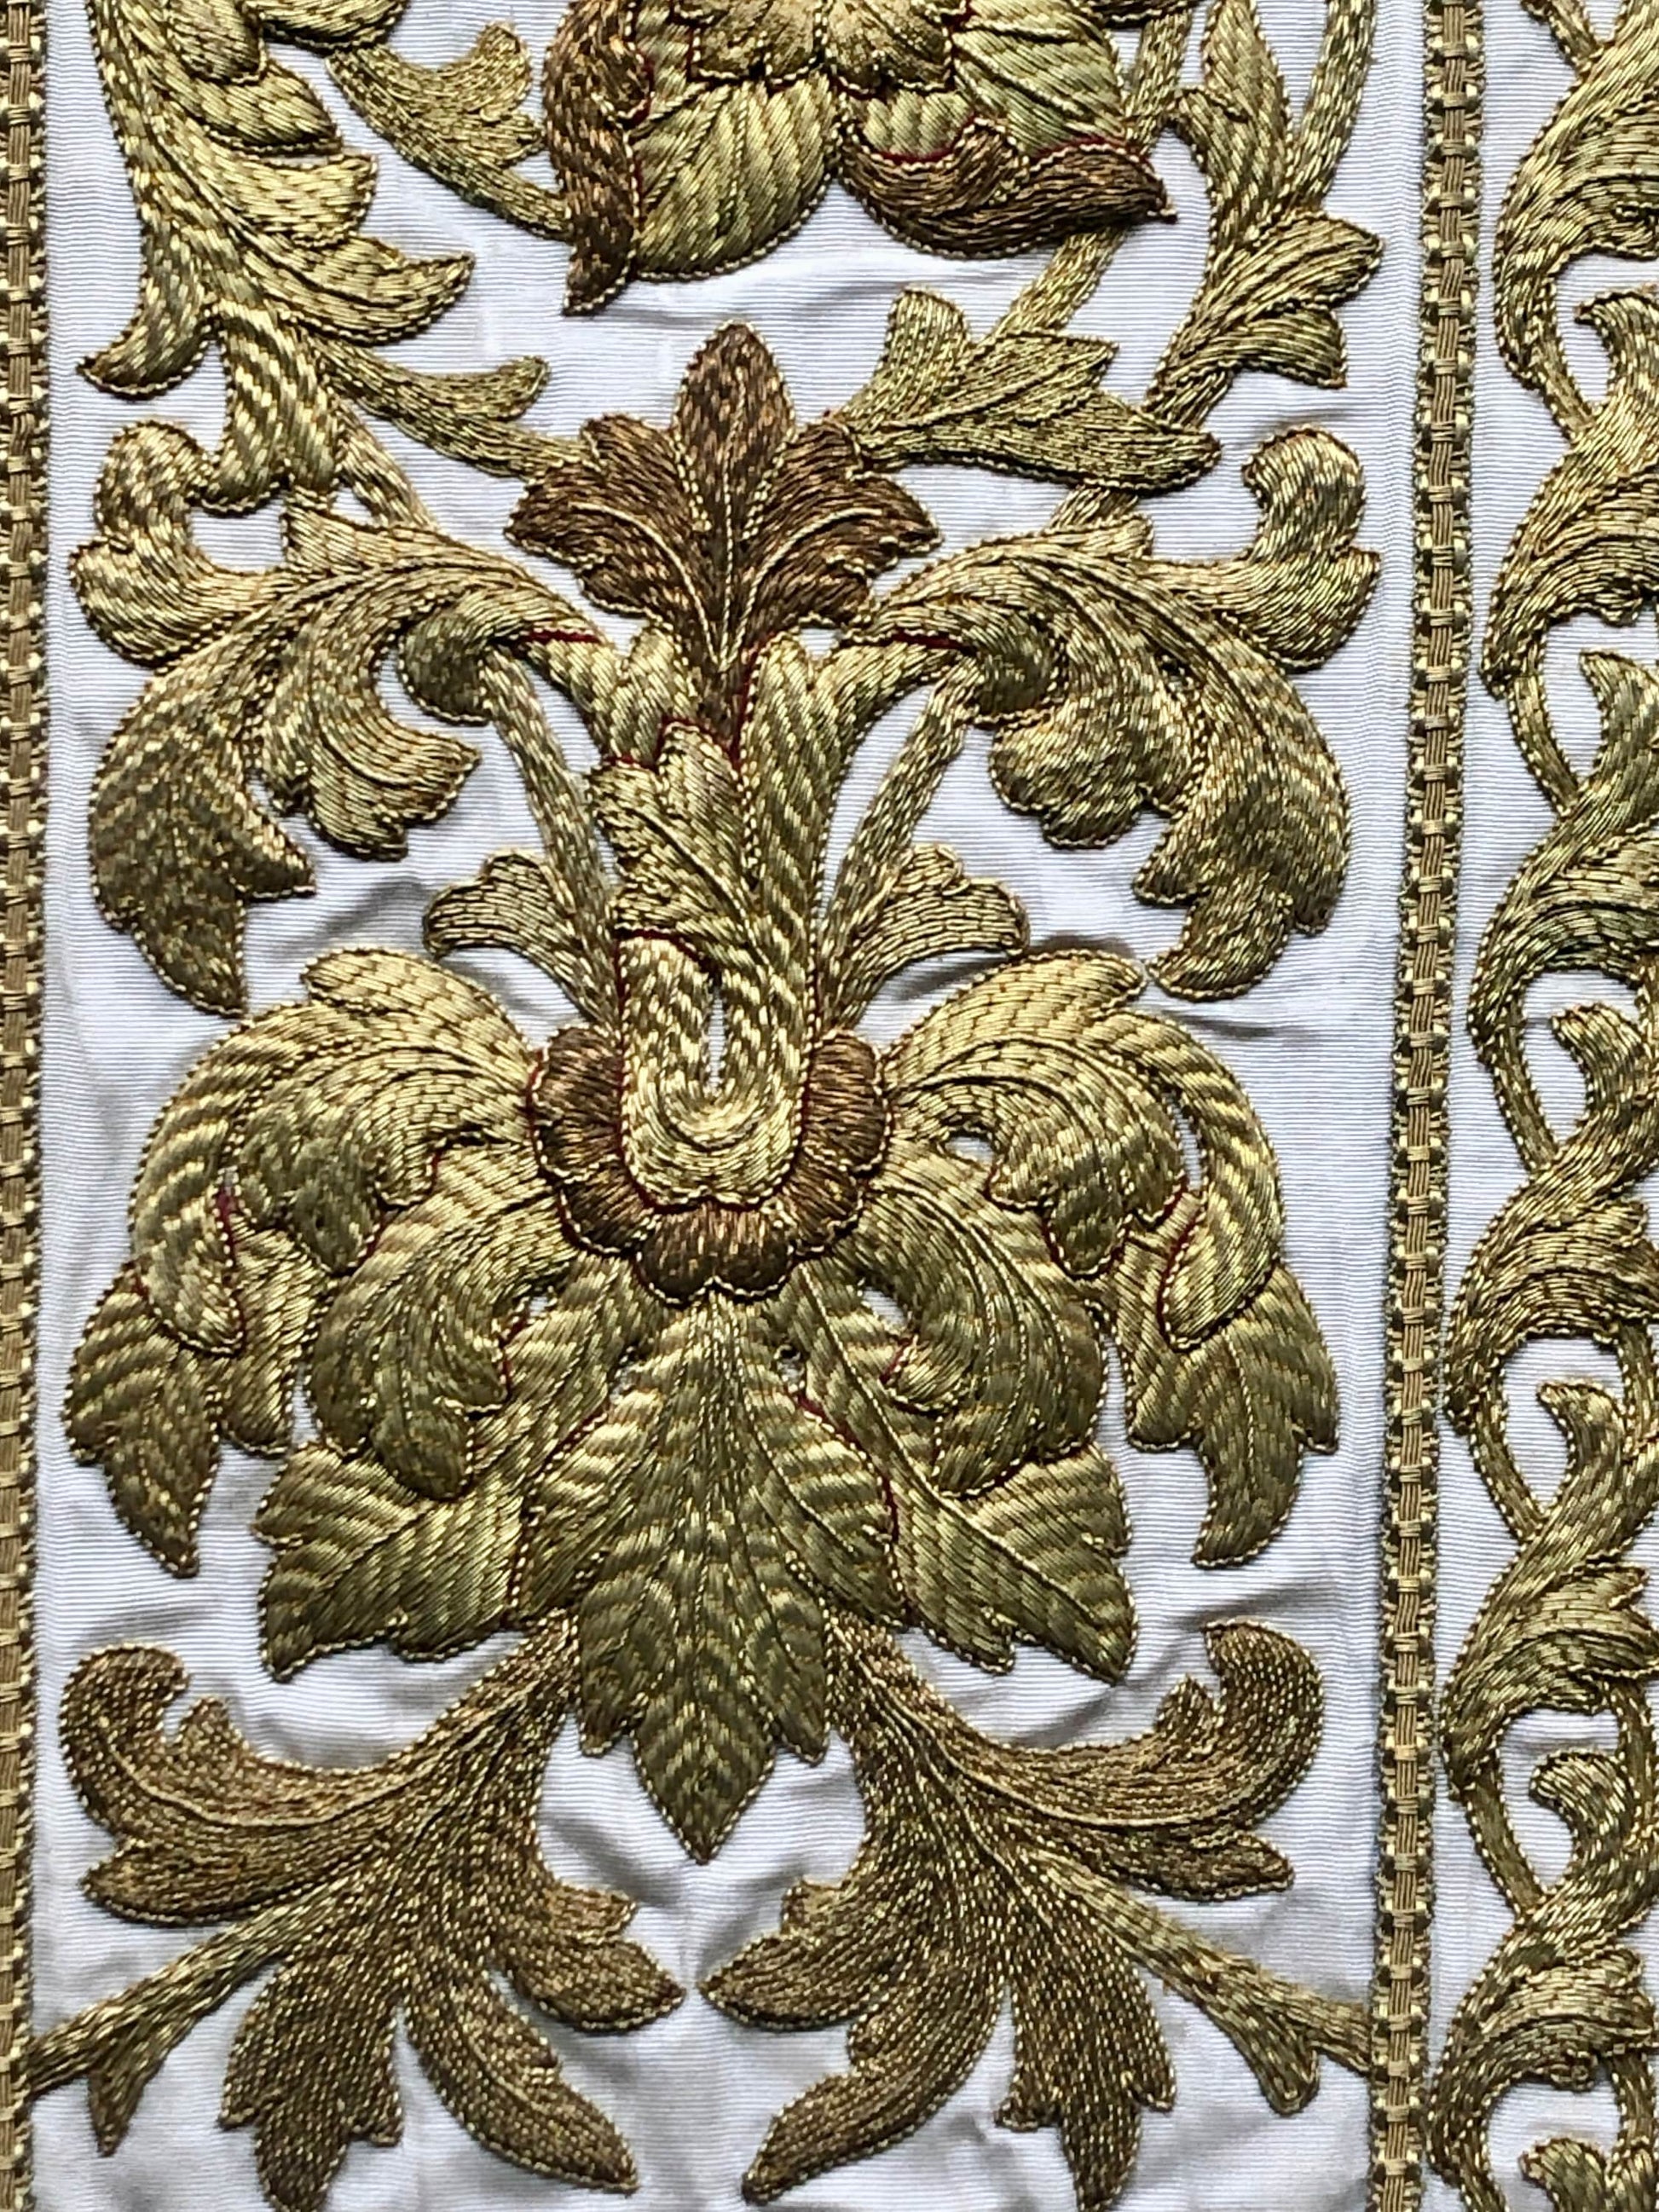 A Textile Sample From Lyon, France. Design For a Chasuble. Heavily Embroidered With Gold Thread. Late 19th Century. 46 x 43.5 cms .